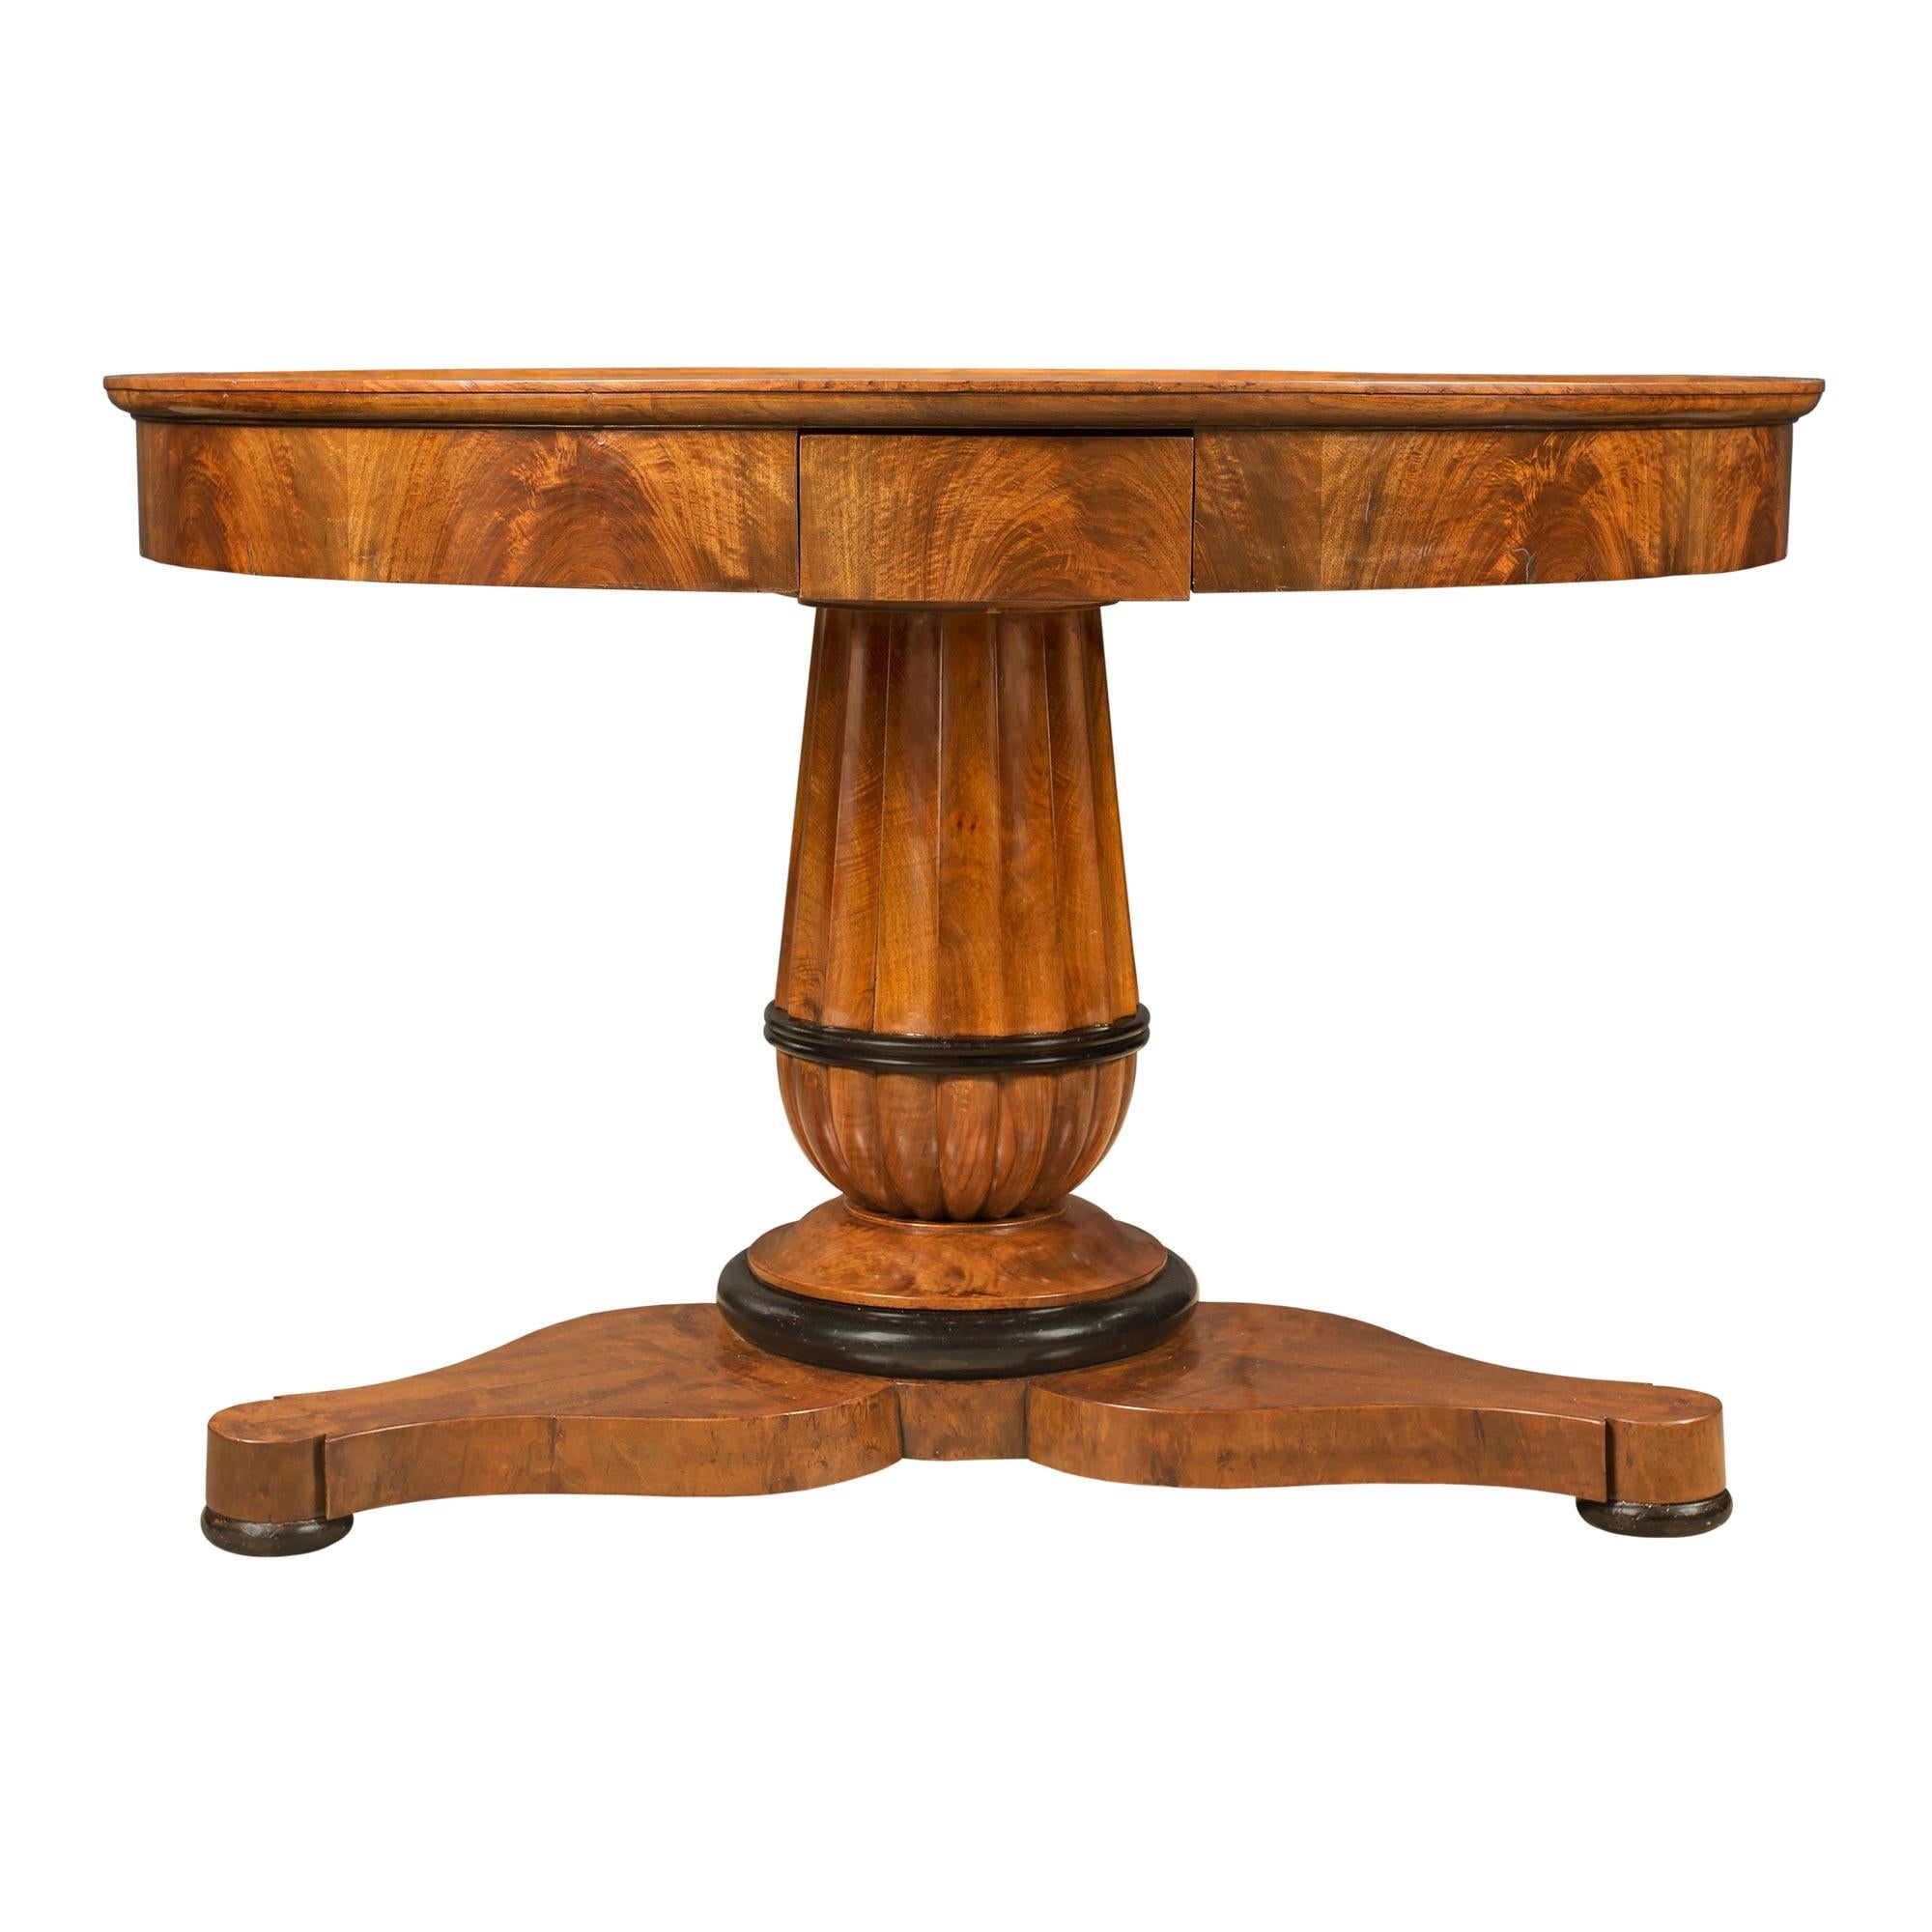 A handsome French 19th century walnut and ebonized fruitwood circular center table. The table is raised by a triangular base with finely scalloped shaped sides and ebonized fruitwood bun feet. The central support displays a most decorative fluted